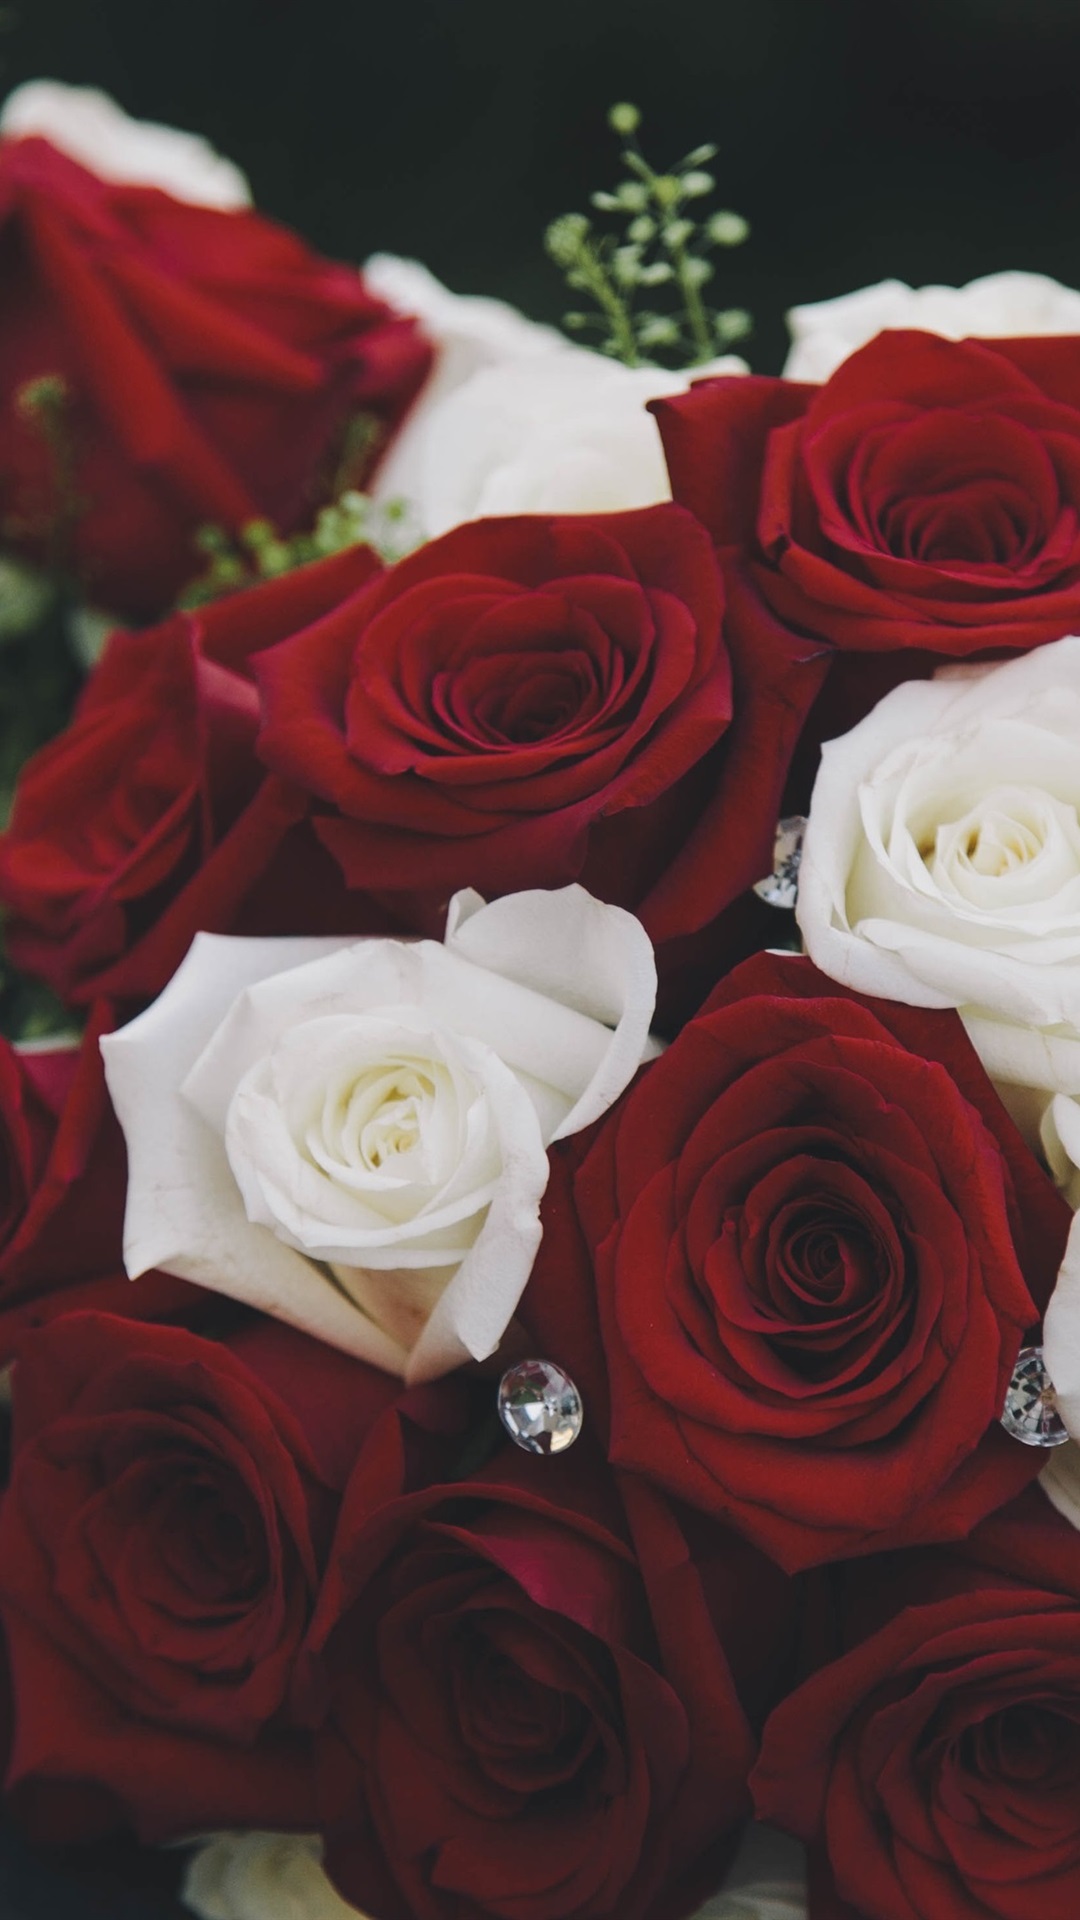 Iphone Wallpaper Bouquet, Red And White Roses - Flower Bouquet - HD Wallpaper 